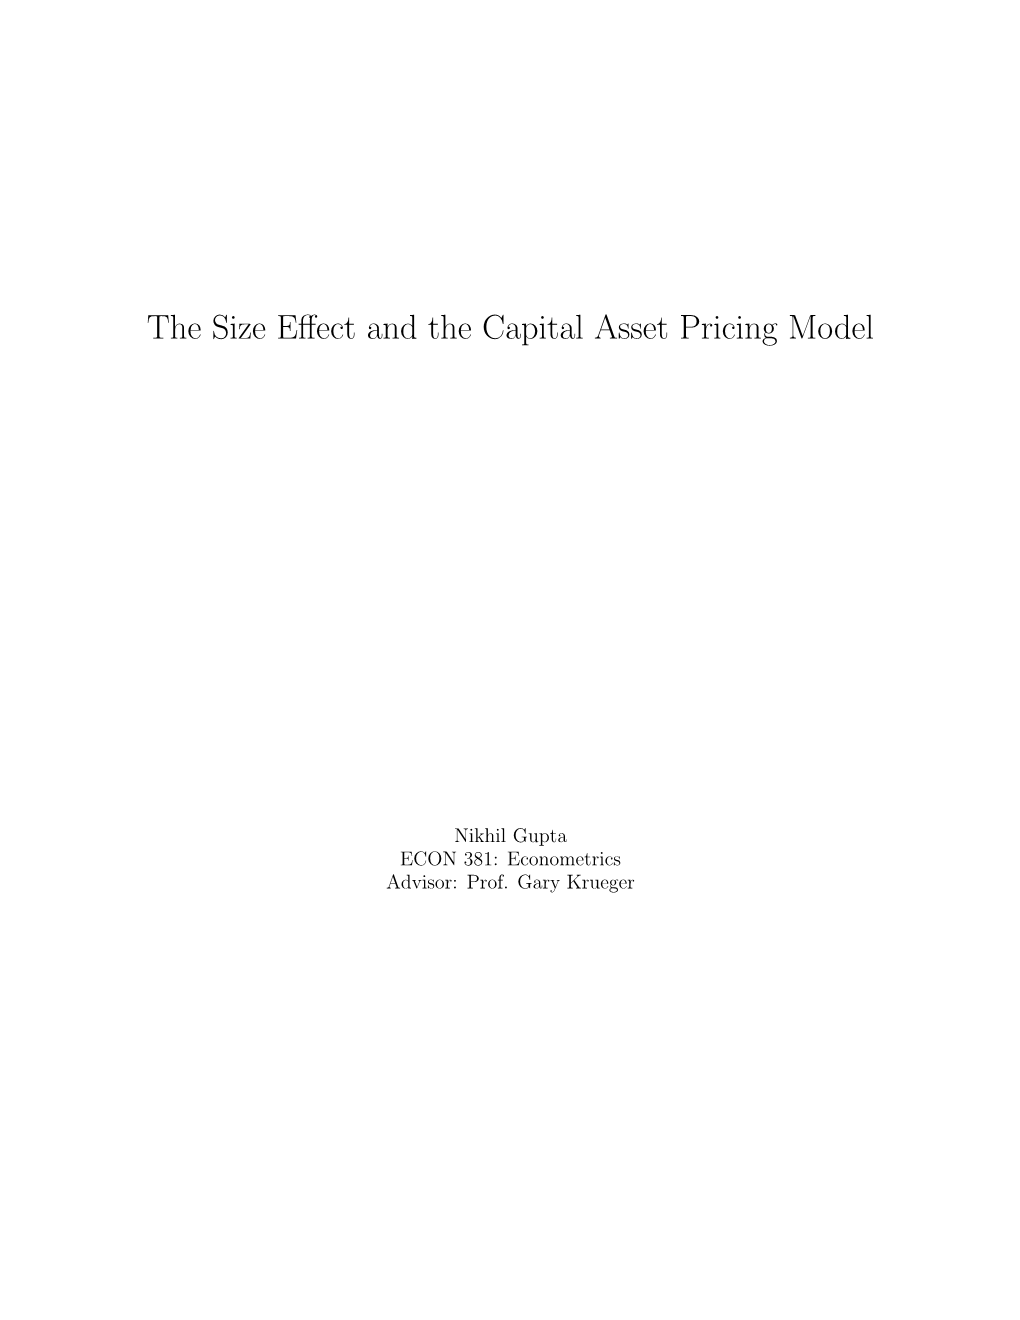 The Size Effect and the Capital Asset Pricing Model